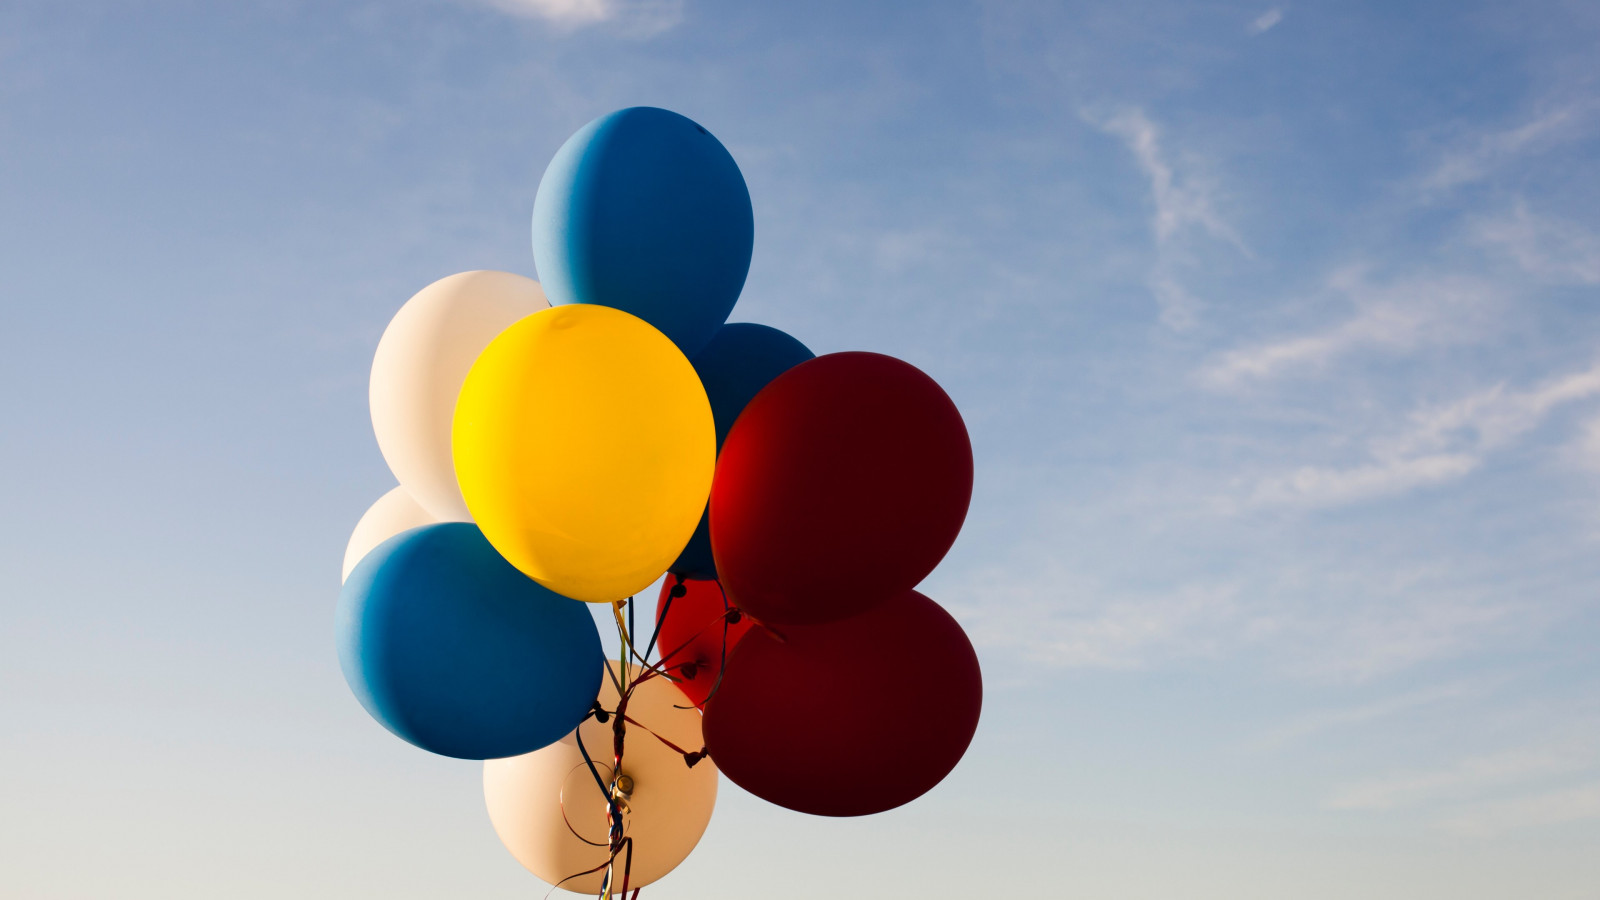 Colored balloons wallpaper 1600x900